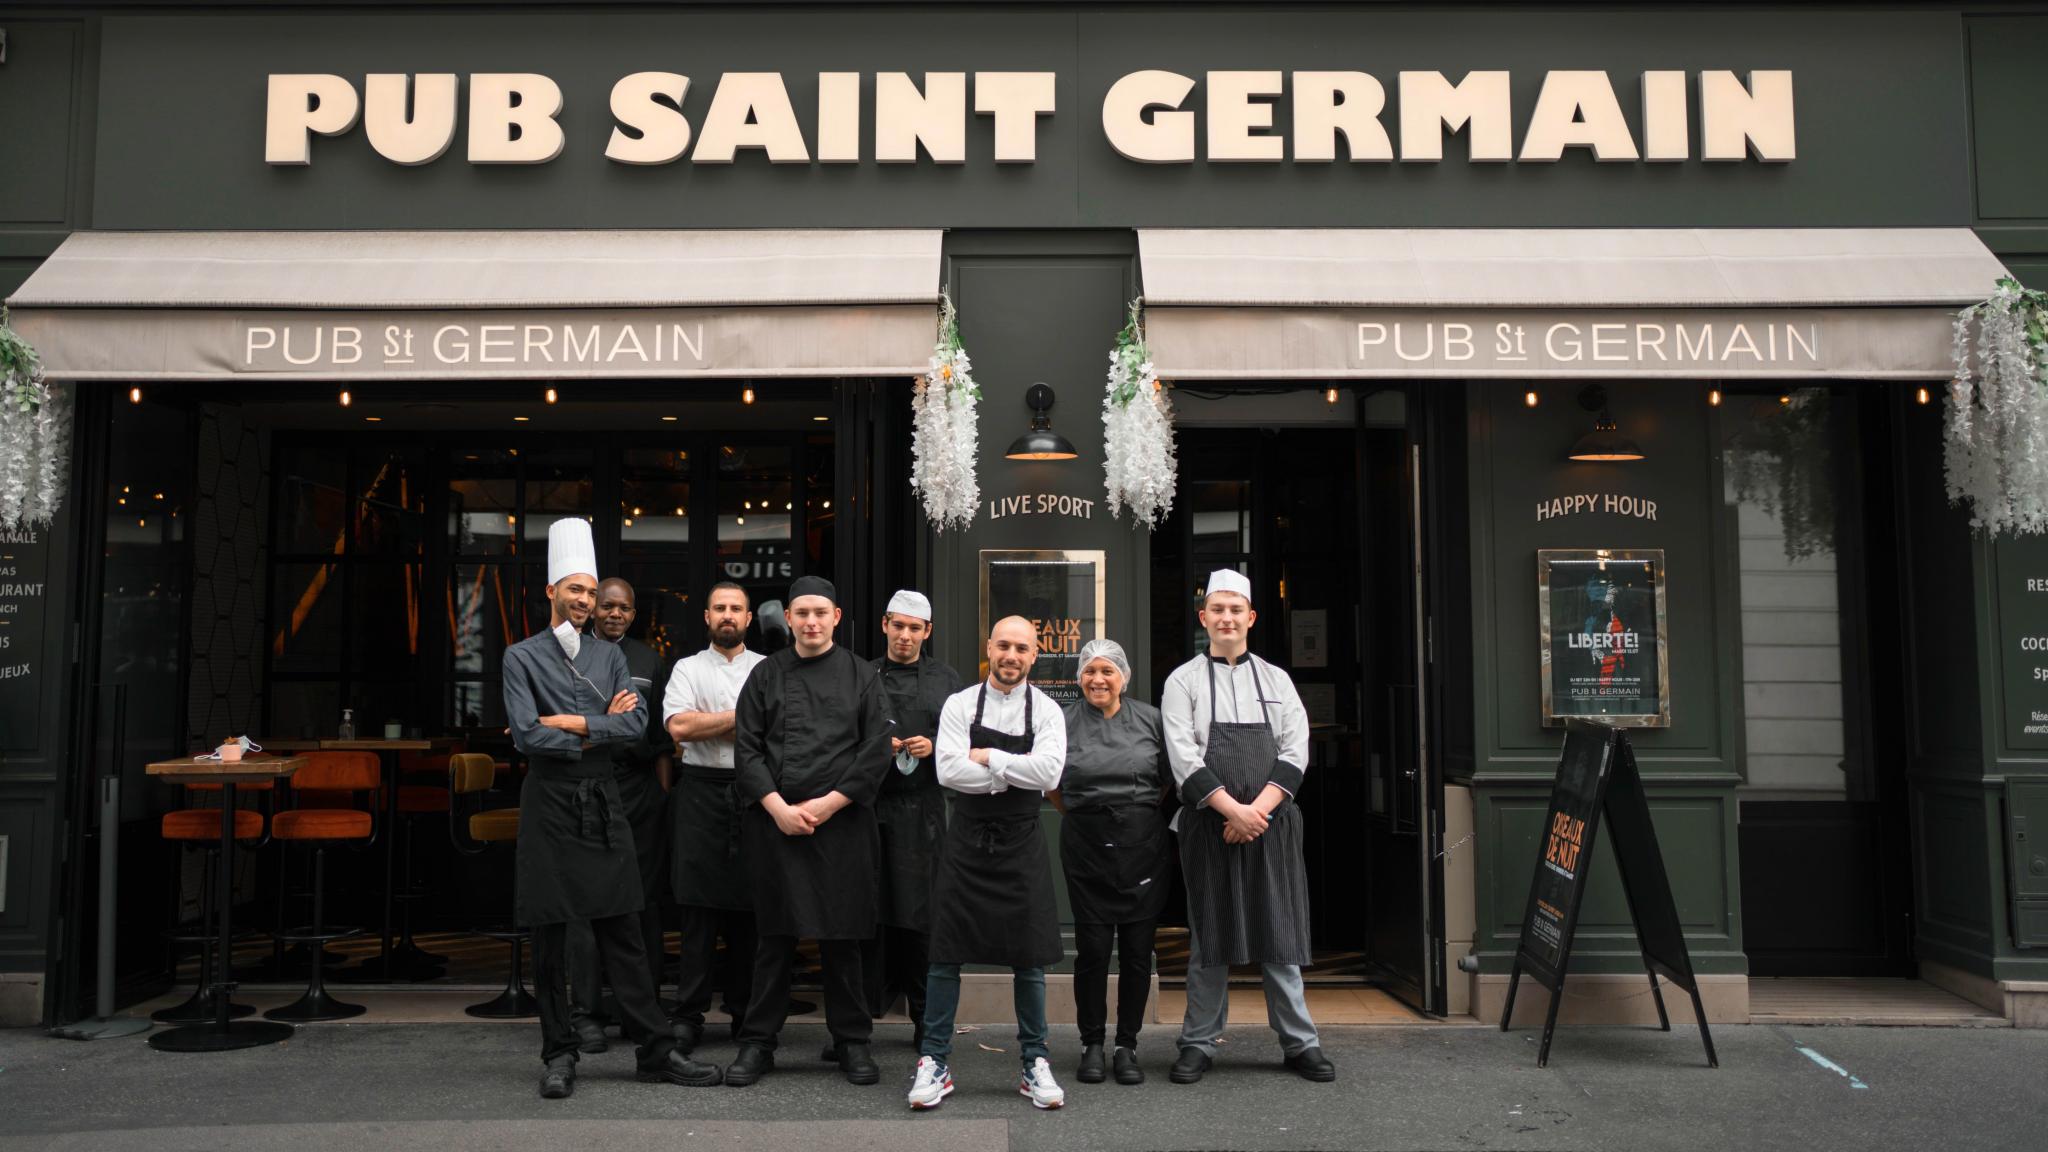 September 2021 : what's new at PUB St GERMAIN ?